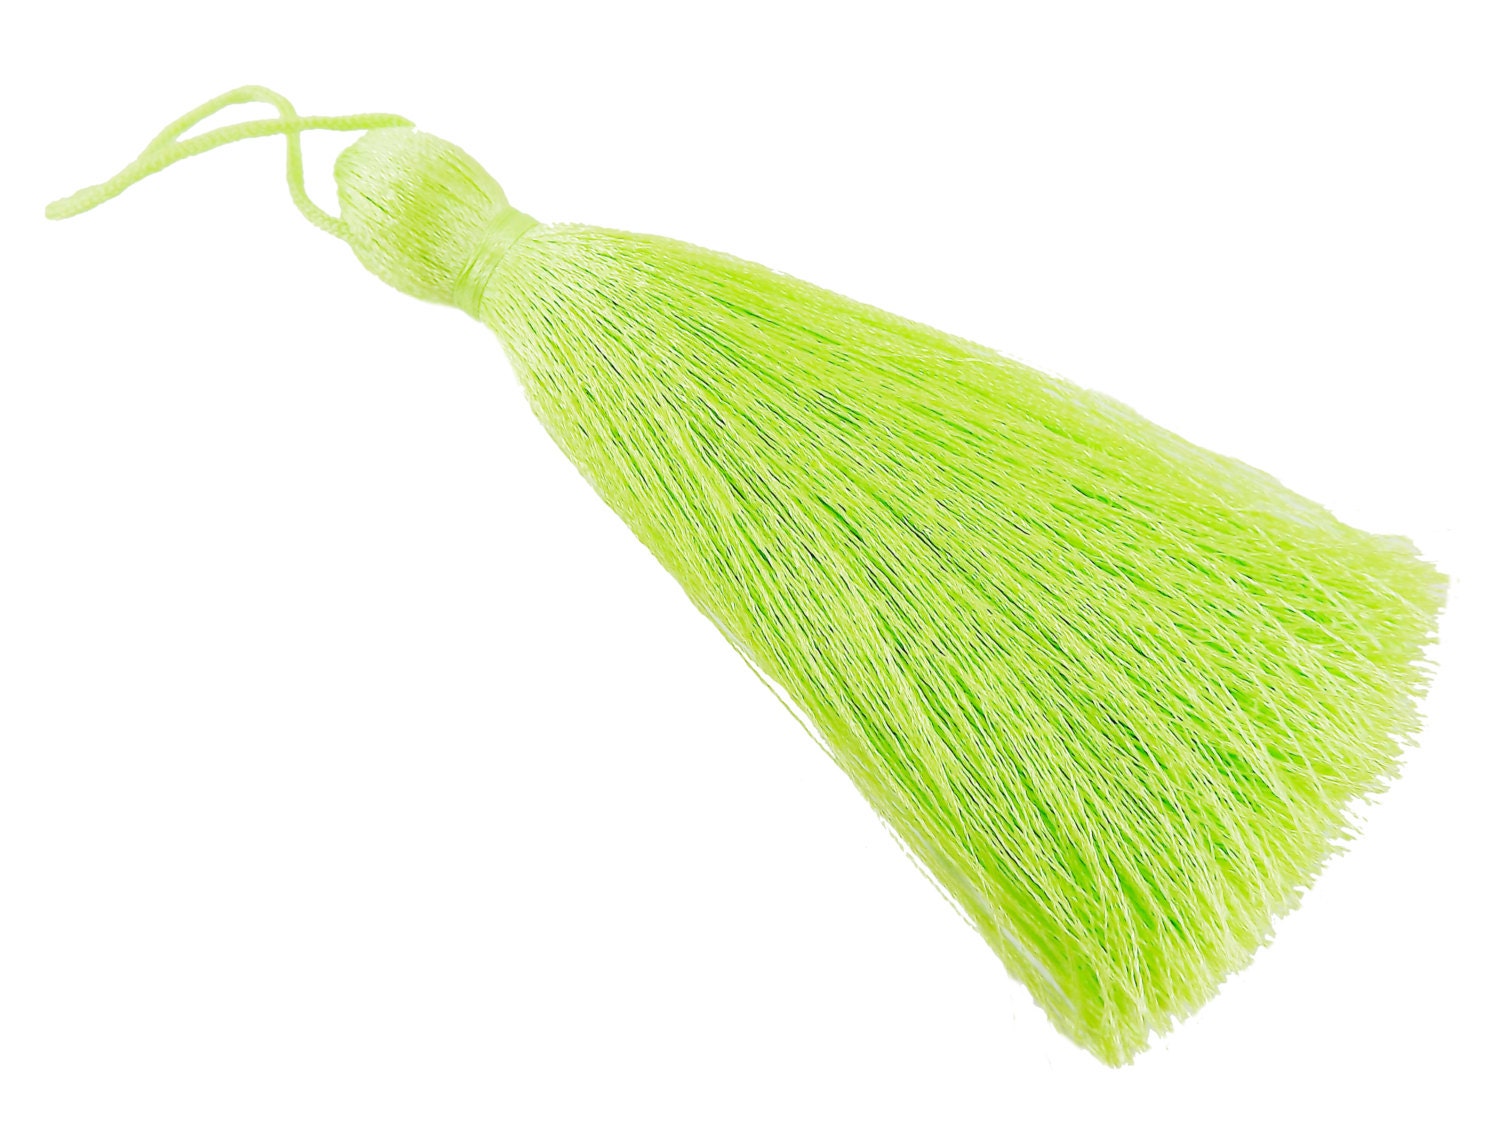 Extra Large Lime Green Chartreuse Thread Tassels Earring Bracelet Necklace Tassel Jewelry Fringe Turkish Findings - 4.4 inch - 113mm - 1 pc